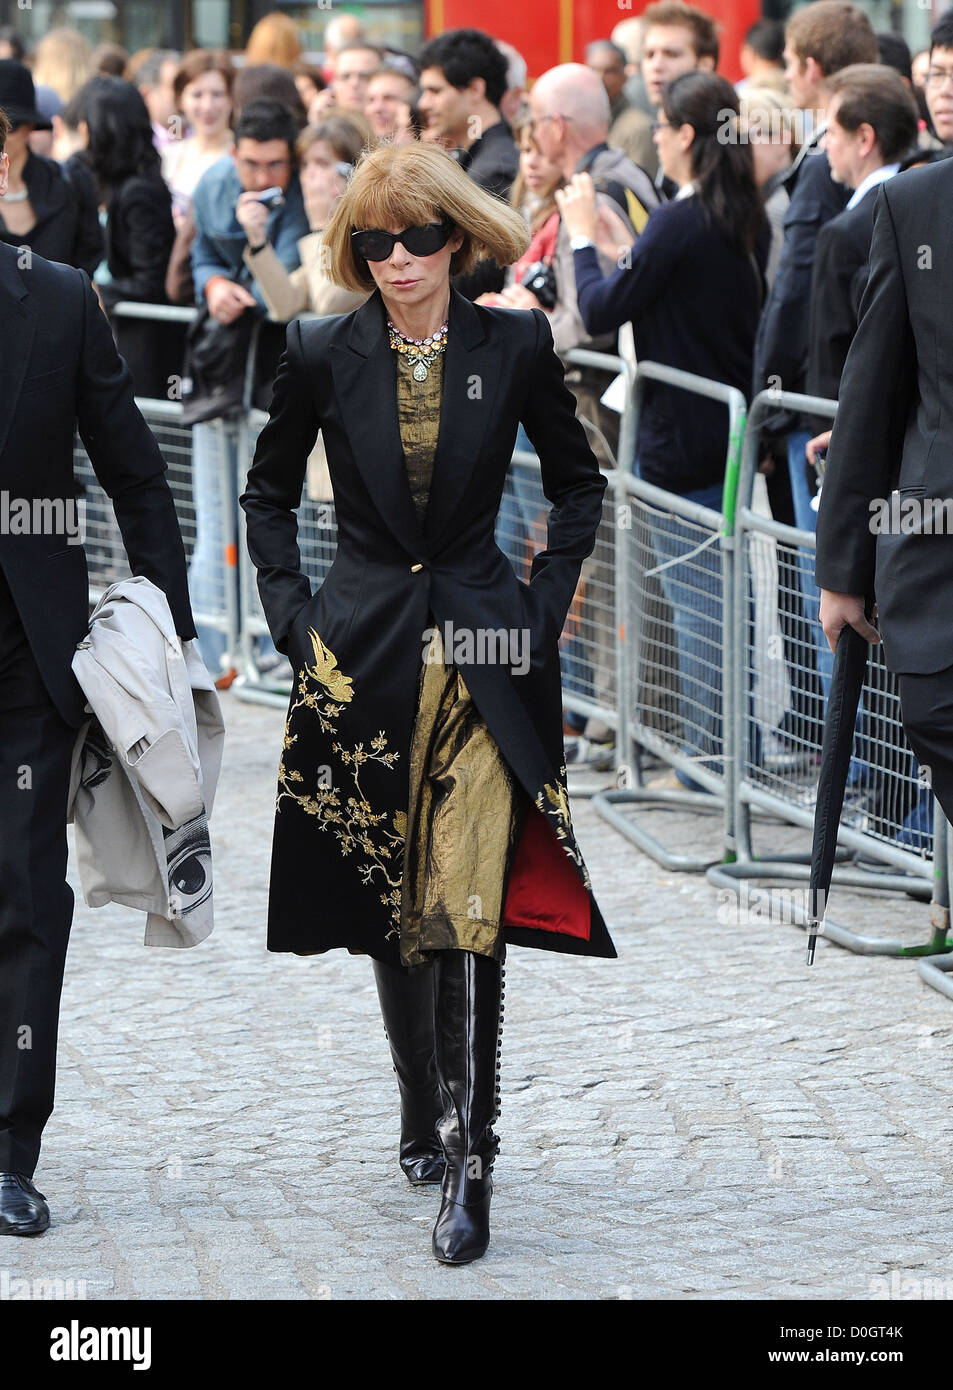 Anna Wintour London Fashion Week - Alexander McQueen memorial service held  at St. Paul's Cathedral - Arrivals. London, England Stock Photo - Alamy